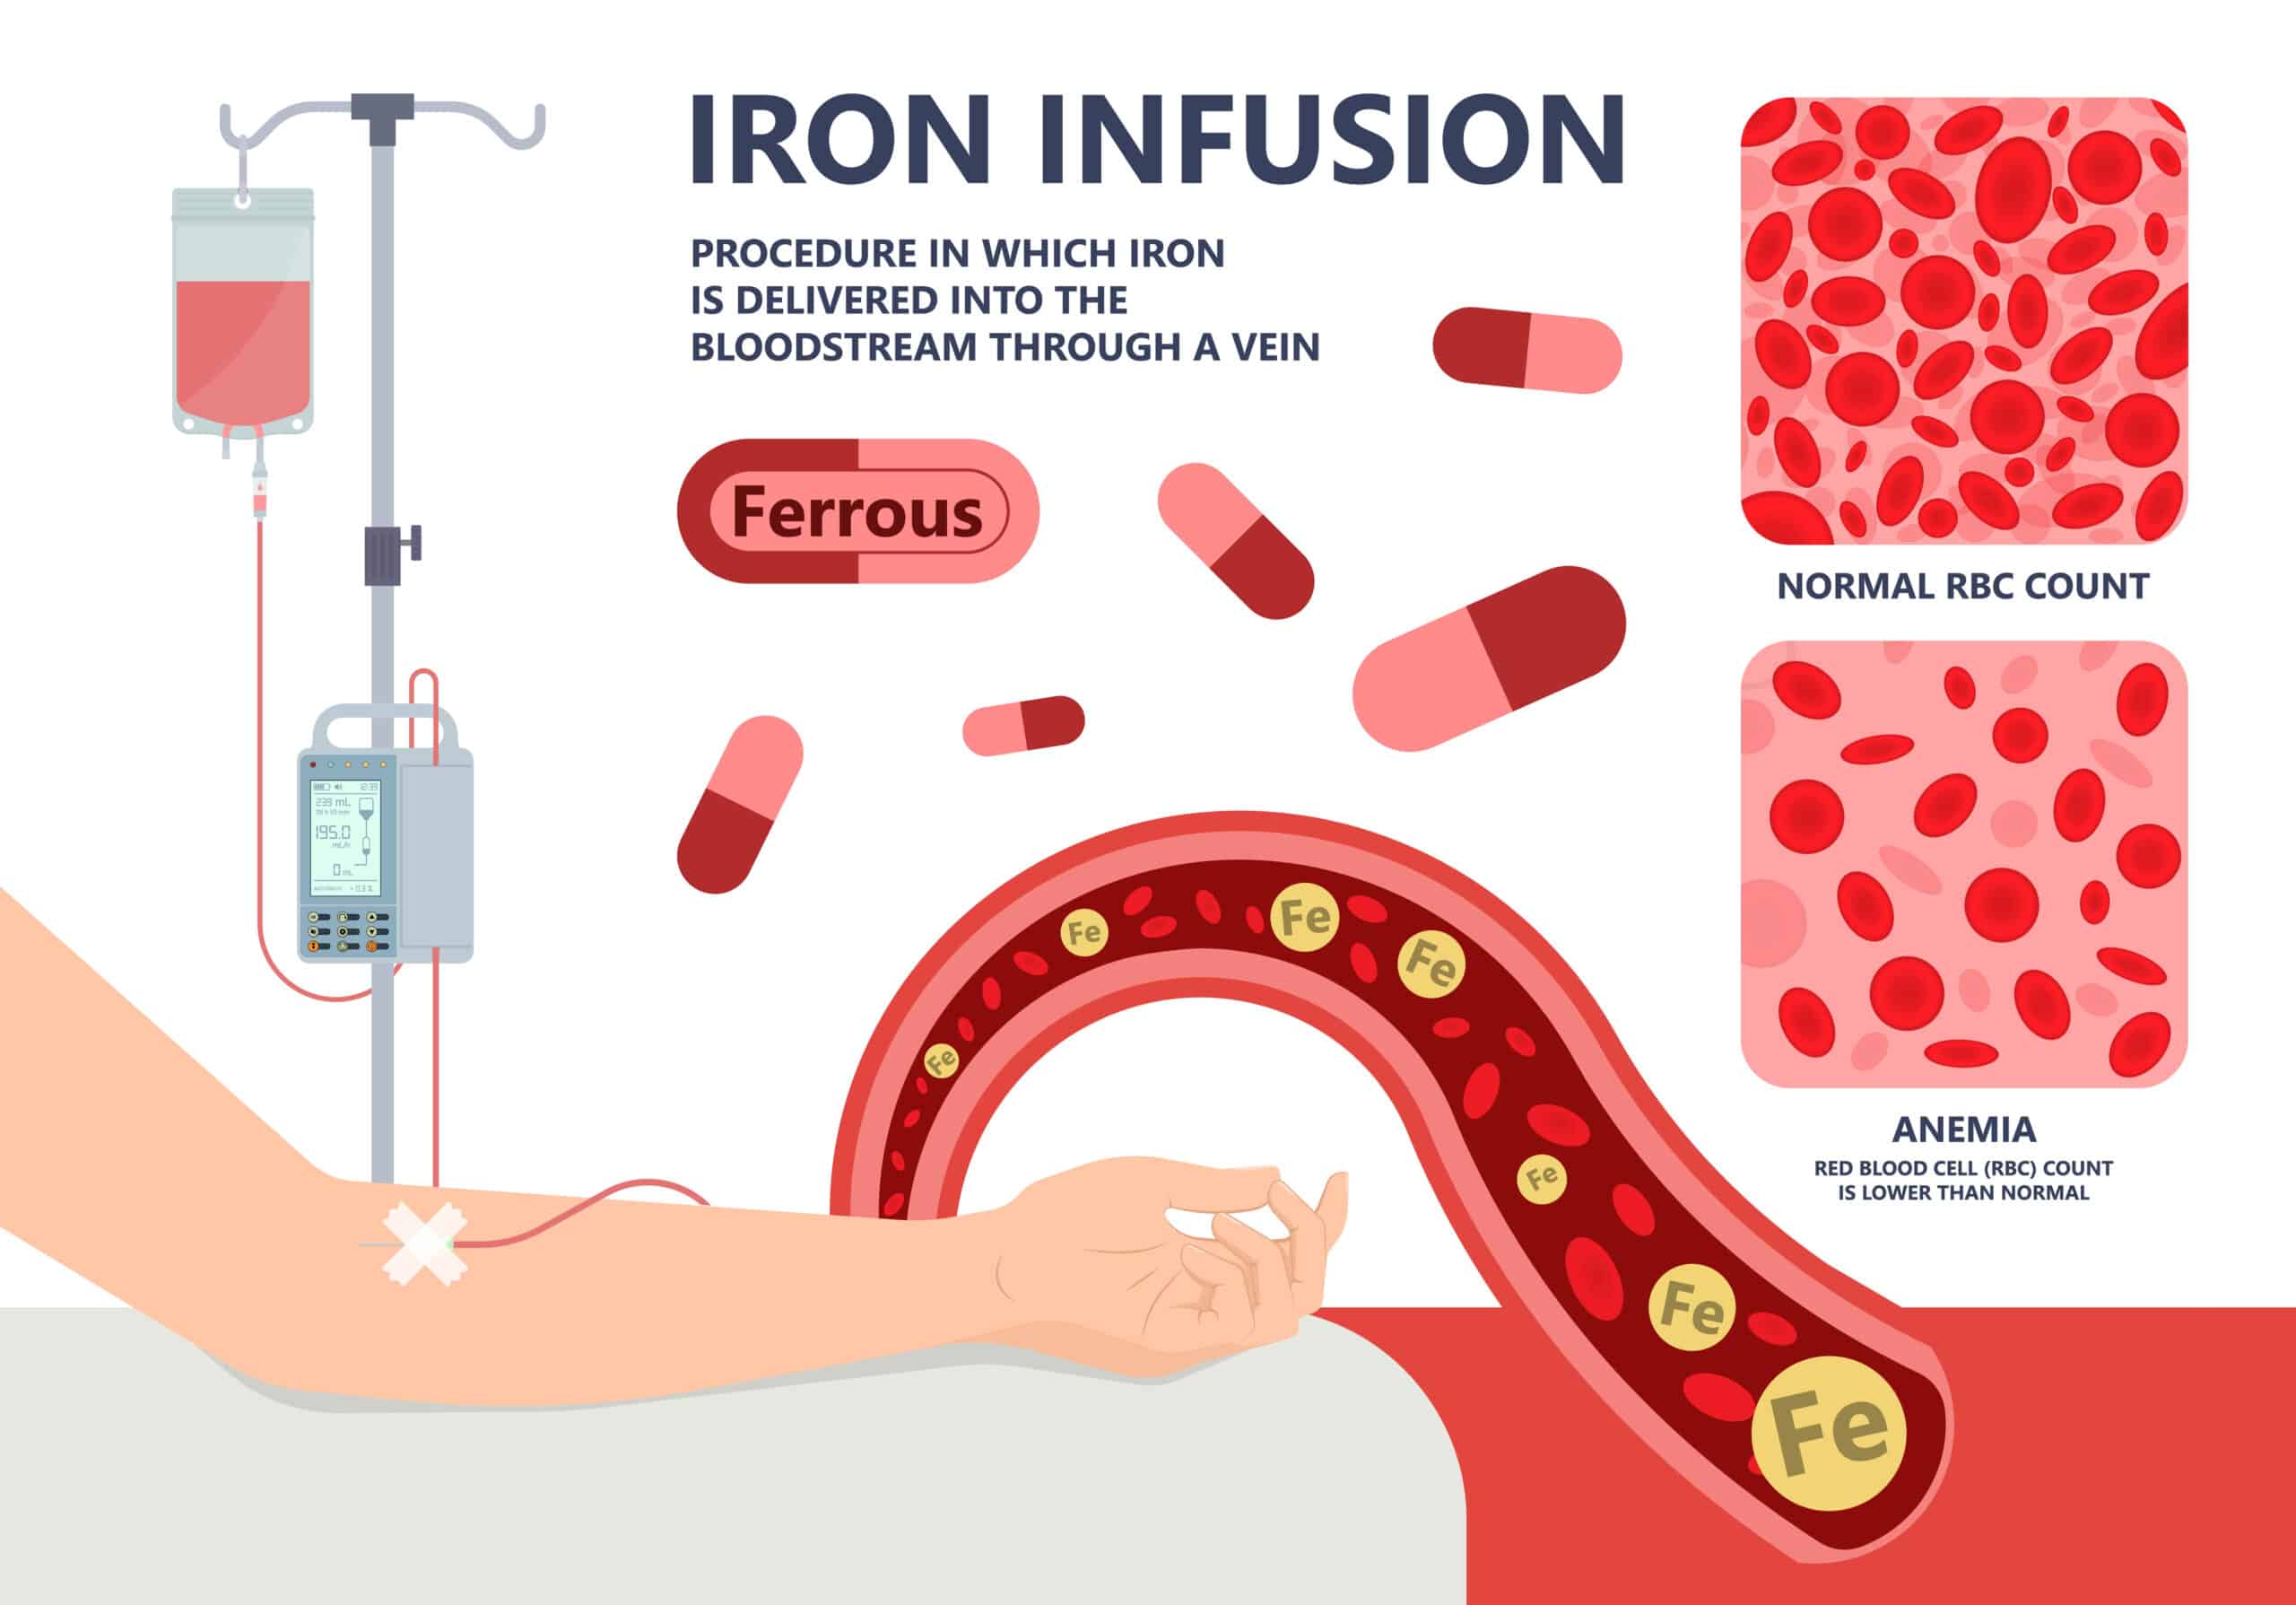 A diagram depicting iron infusion into the blood via iv drip